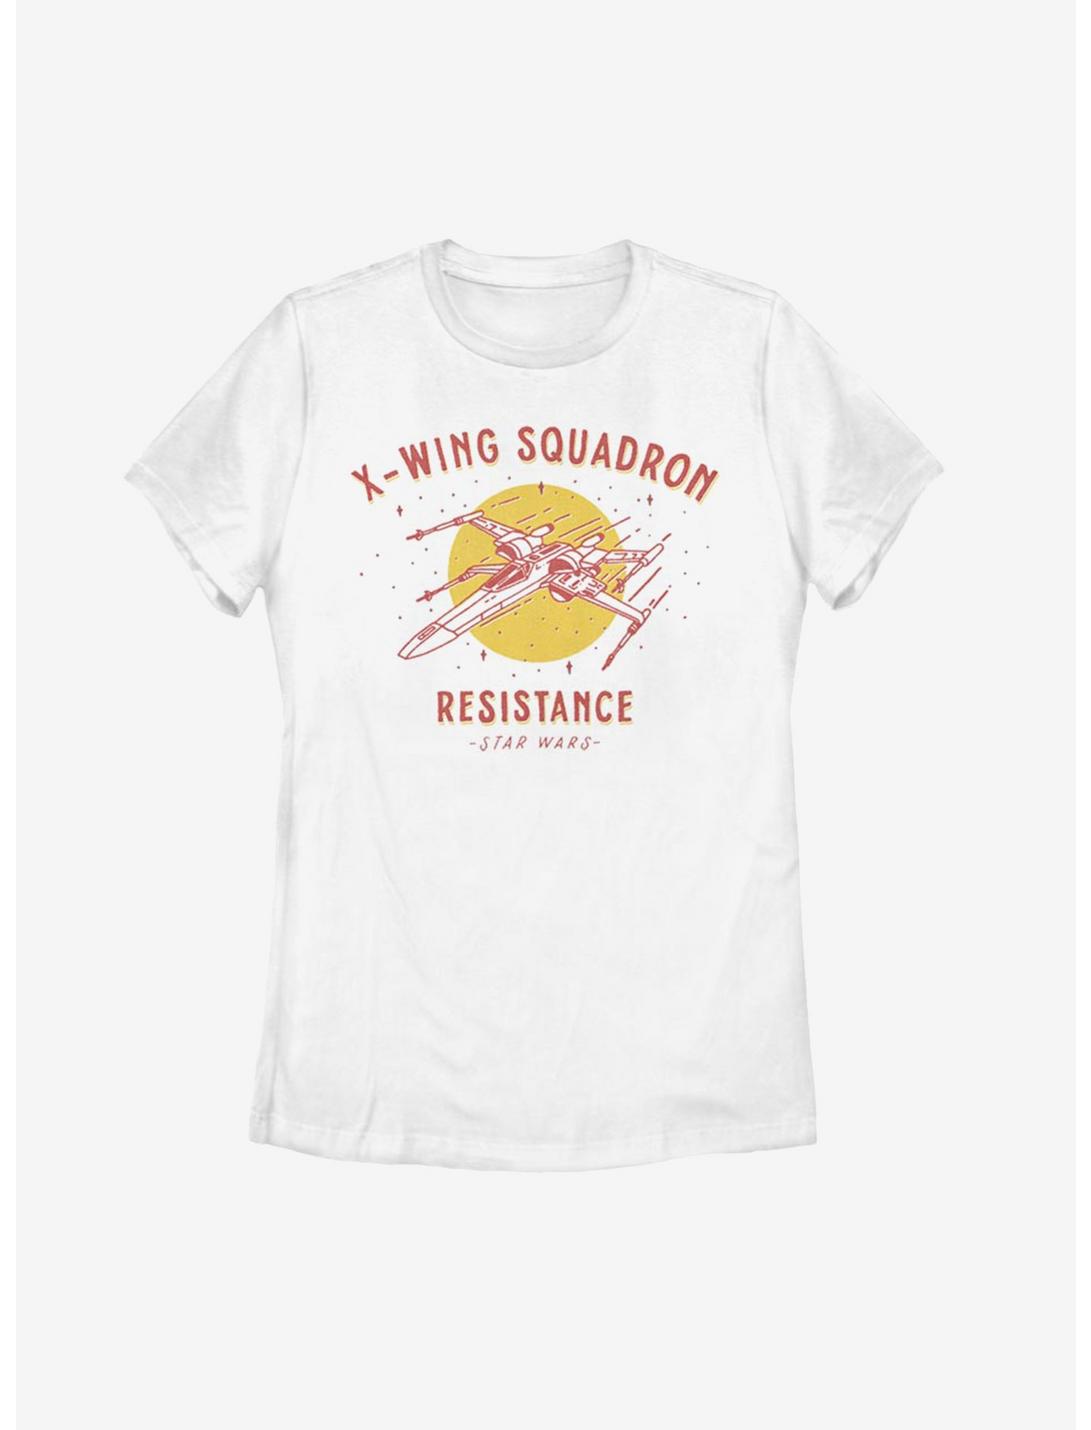 Star Wars Episode IX The Rise Of Skywalker X-Wing Squadron Resistance Womens T-Shirt, WHITE, hi-res